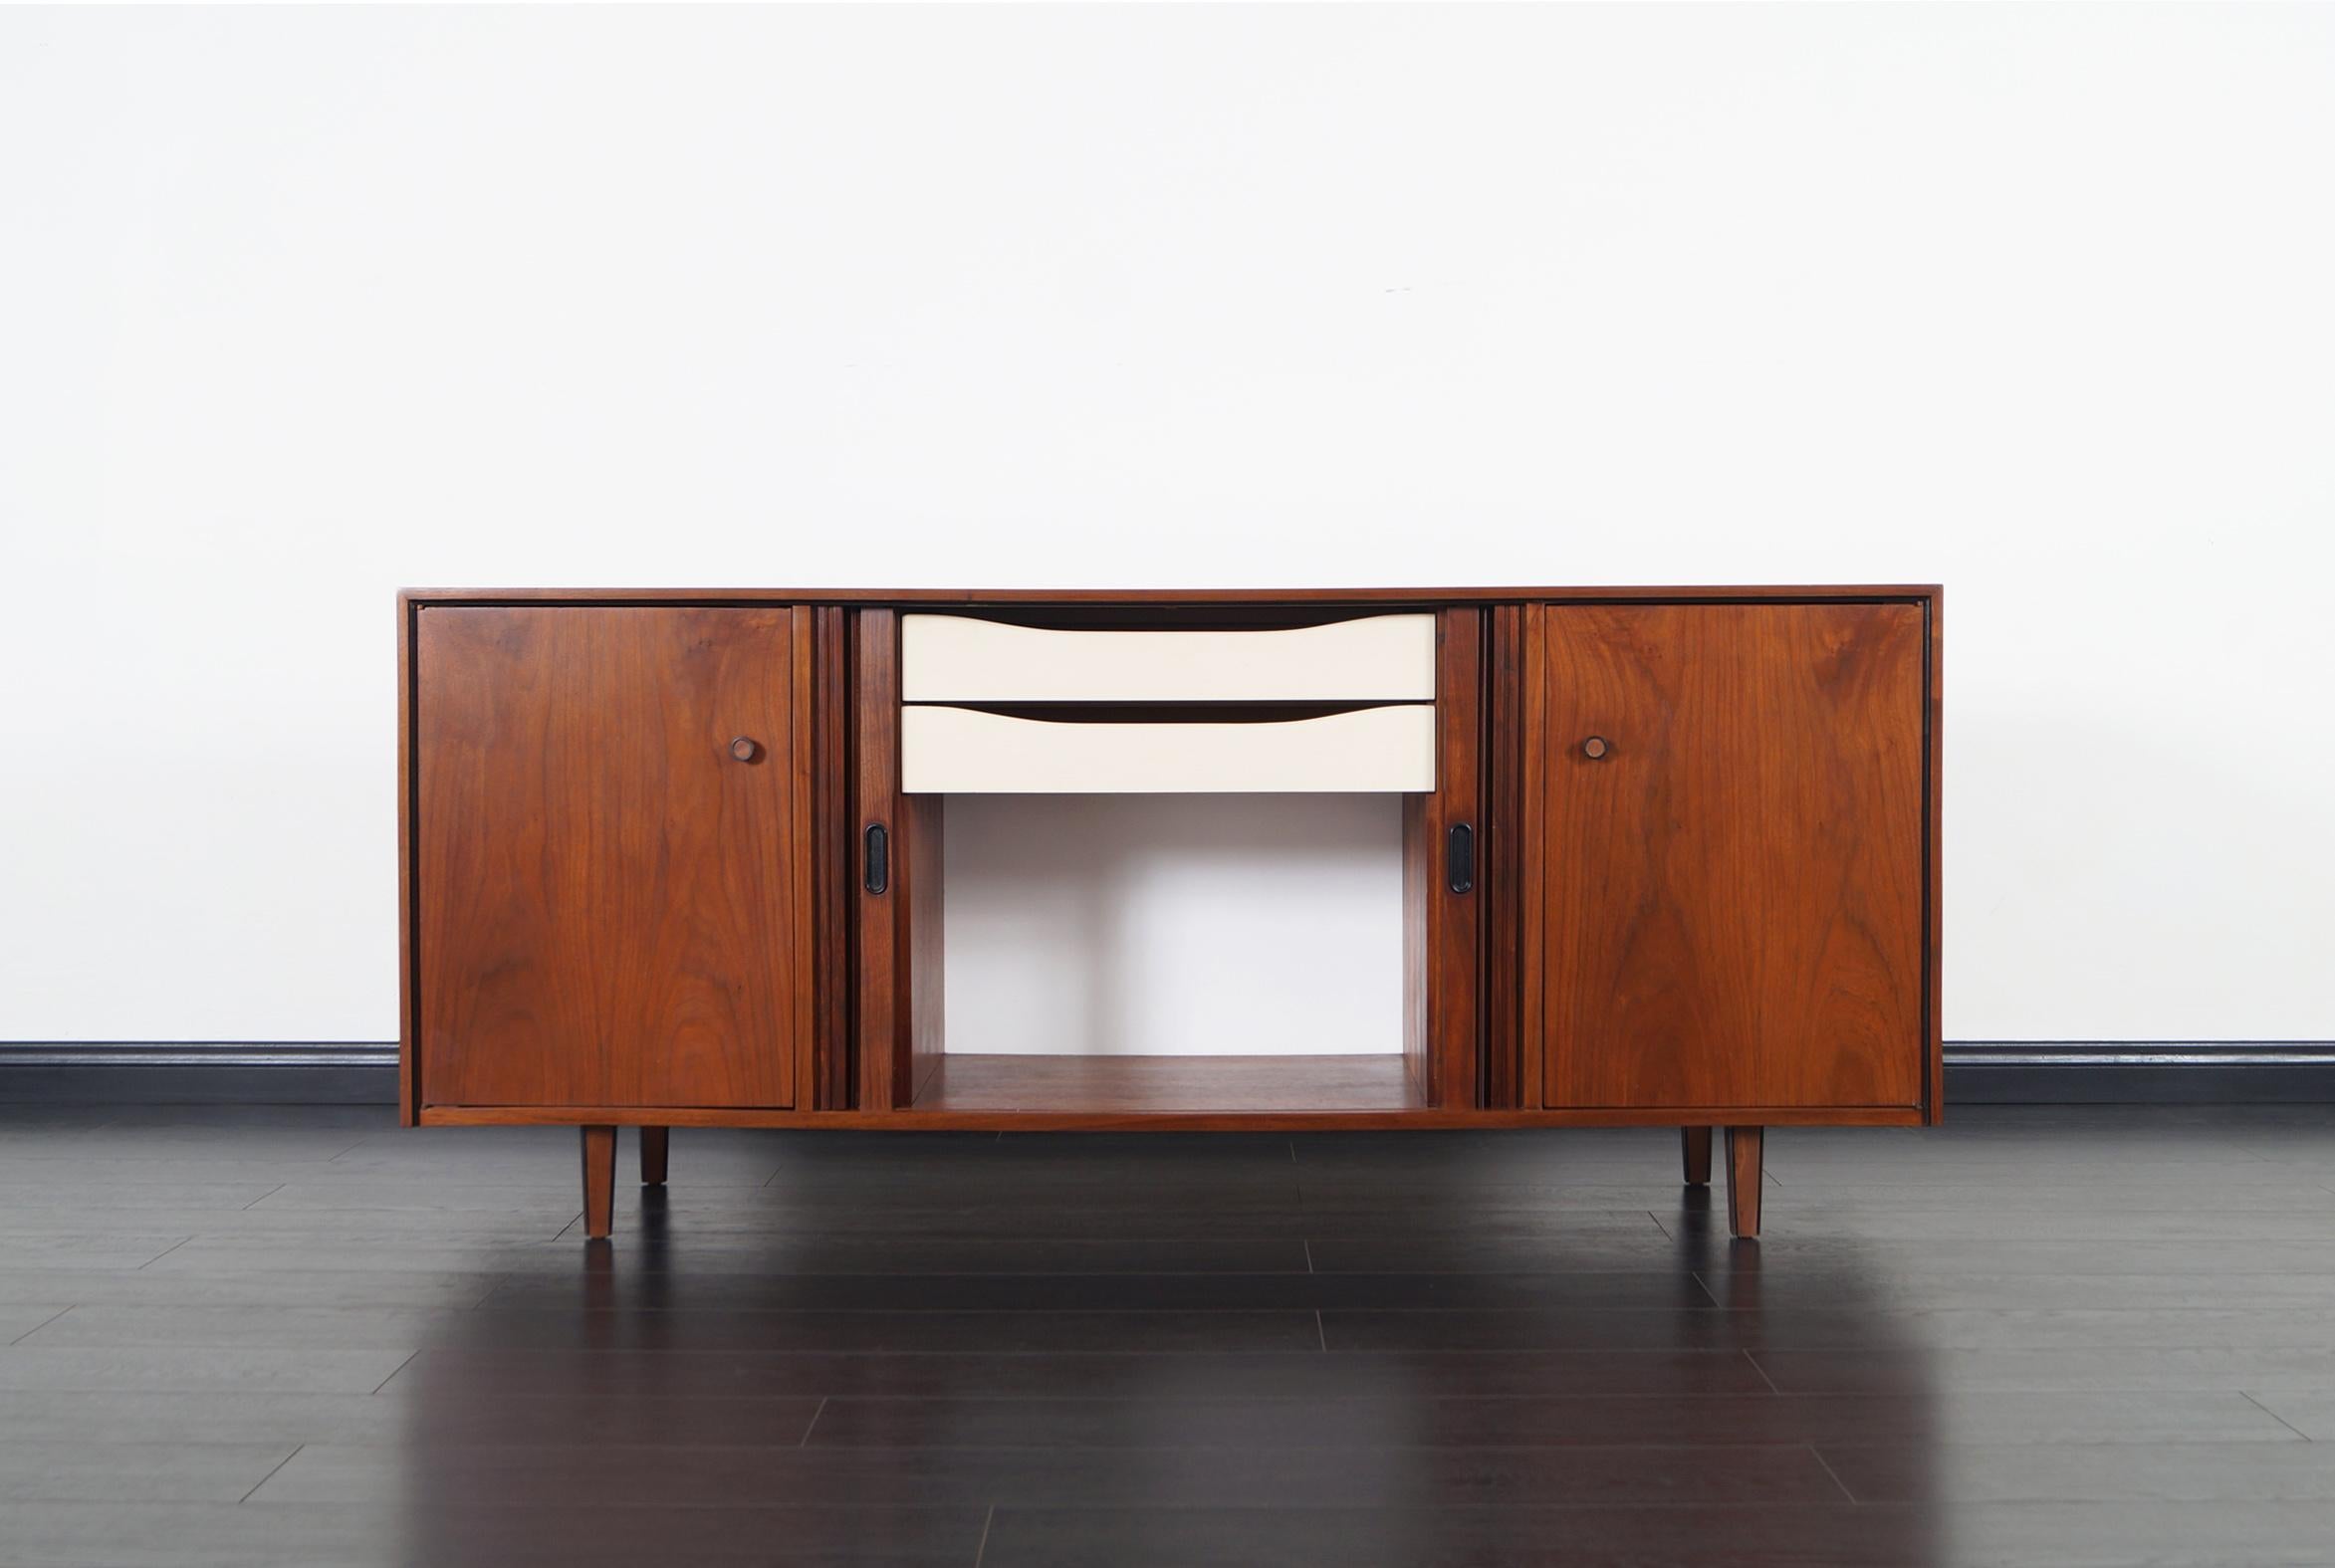 Mid-Century Modern walnut tambour door credenza by Dillingham. Features adjustable shelves on each end, the middle section of the piece has a series of two pull-out drawers behind the tambour doors.